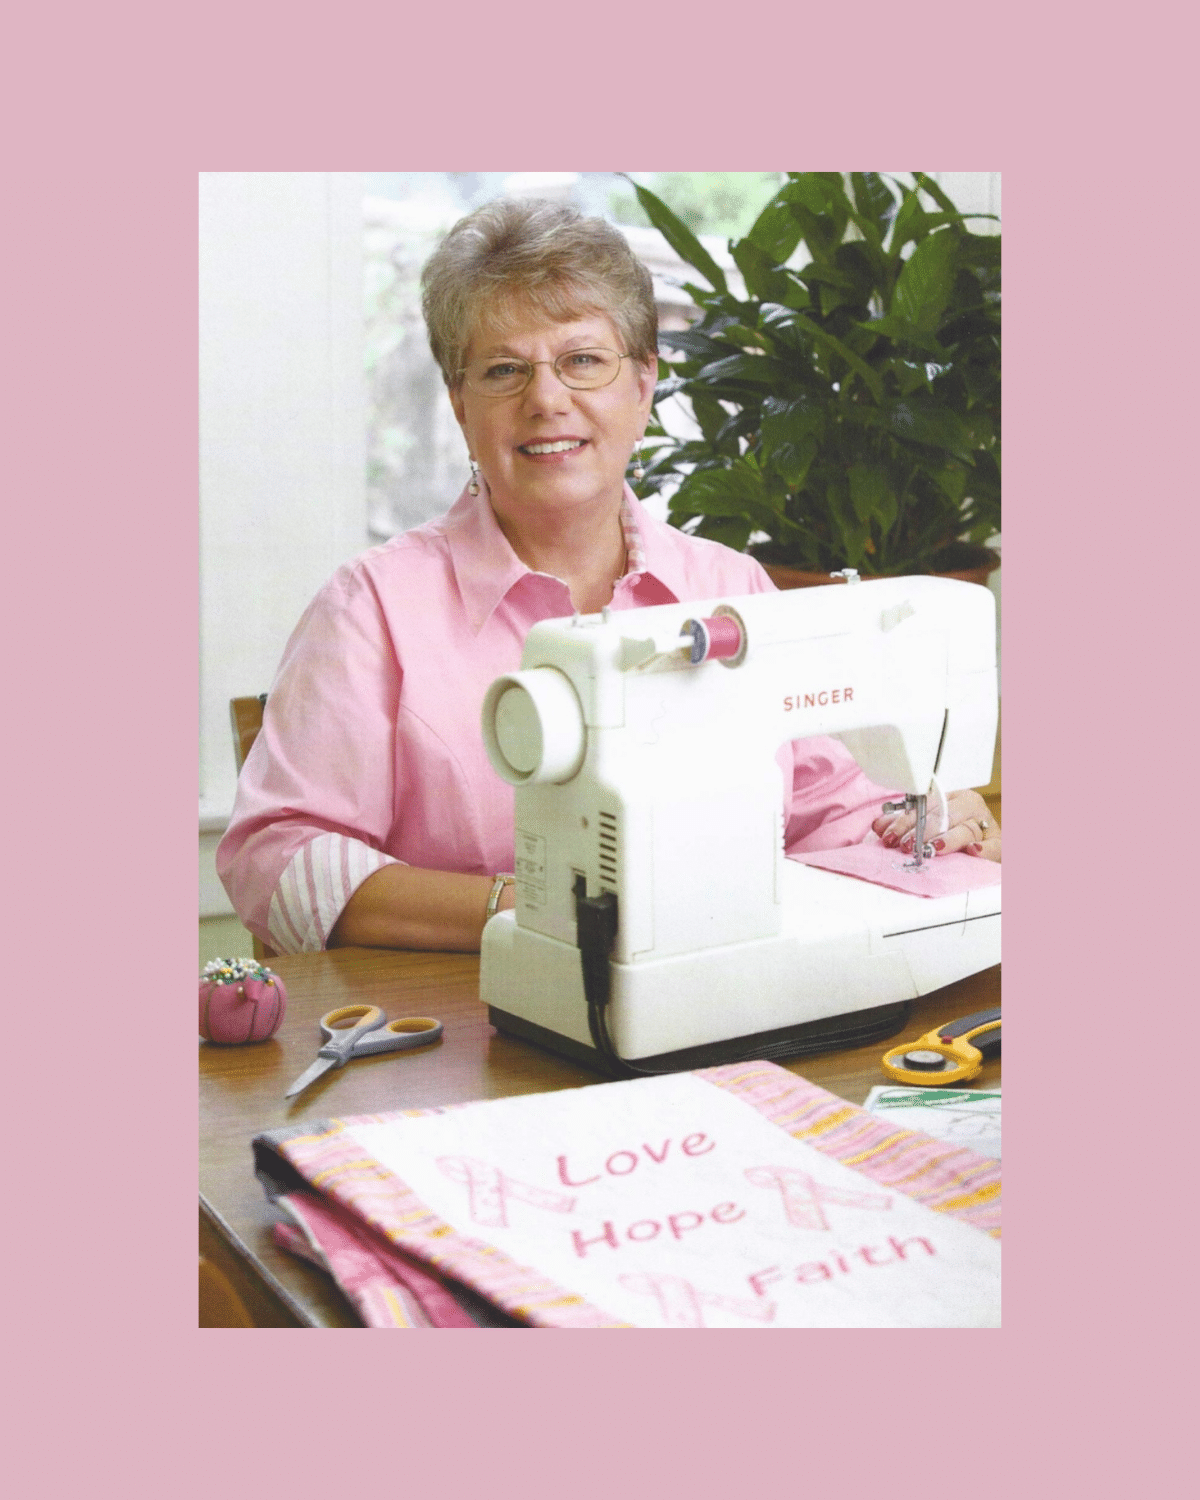 The Quilt That Brought Carol to Cancer Support Community